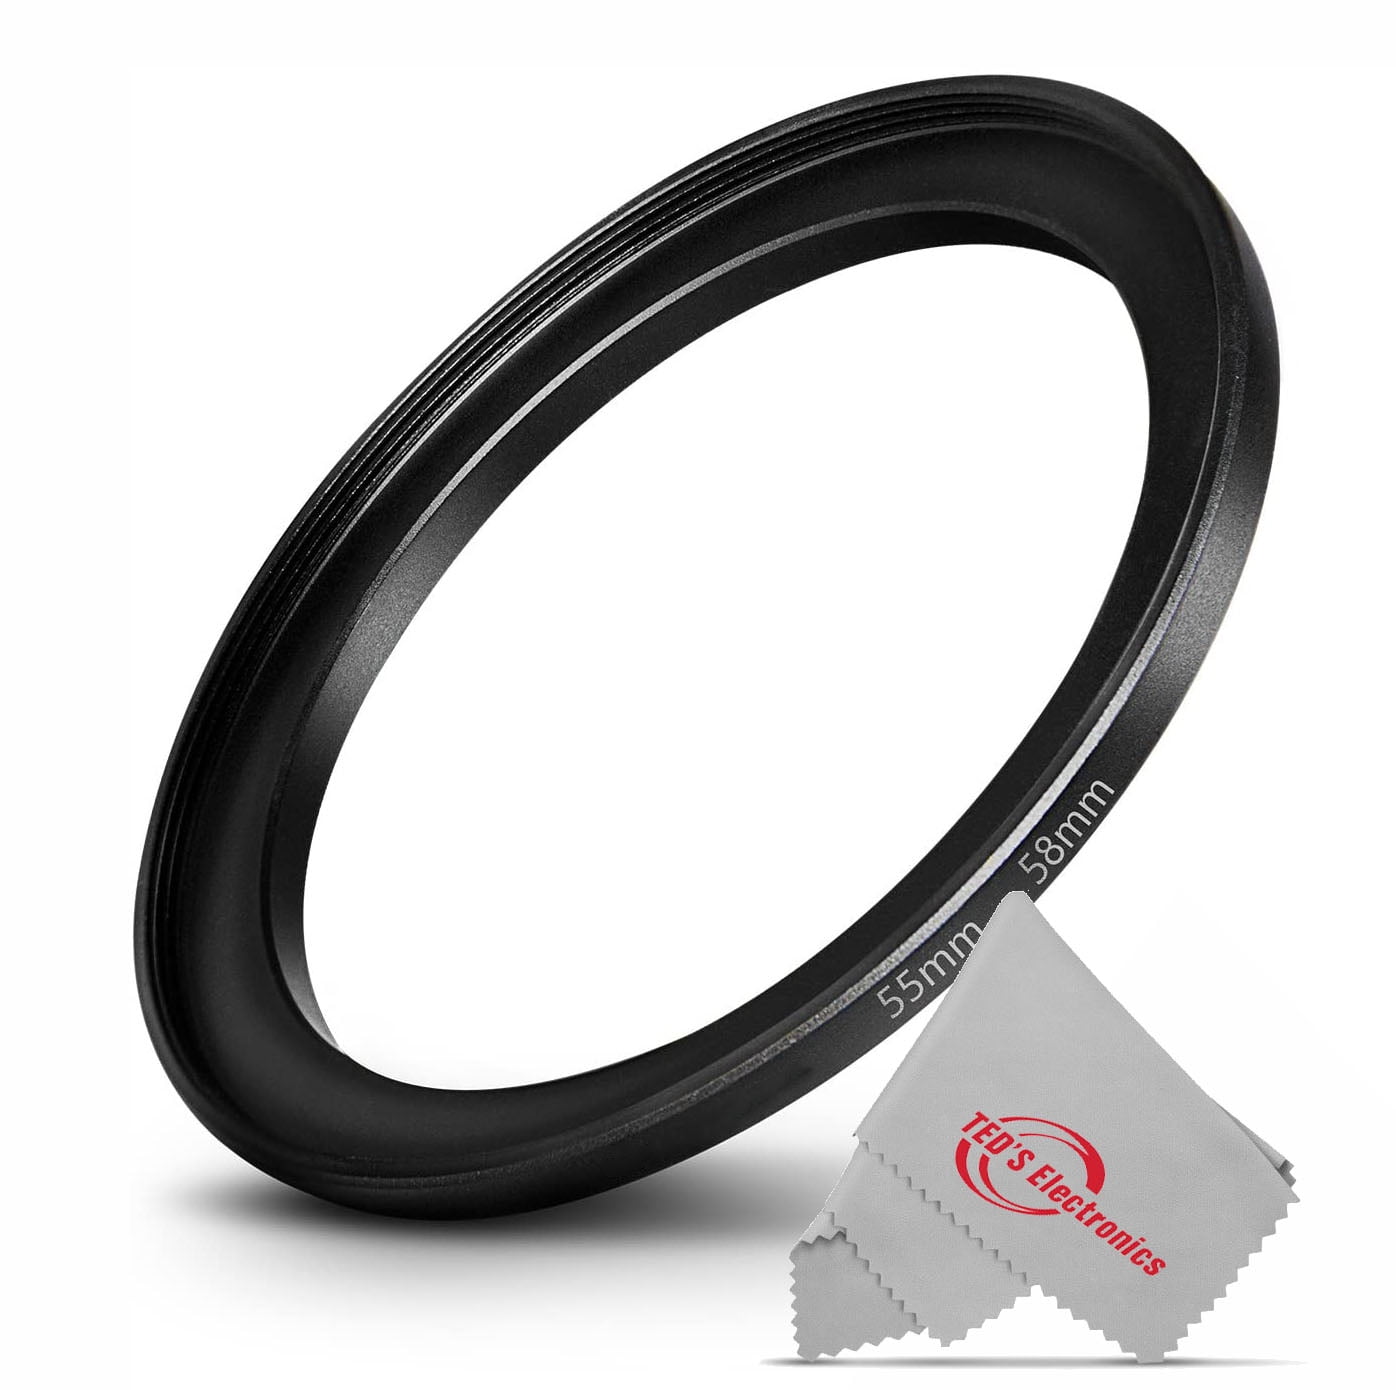 52mm-55mm Stepping 52-55 Step-Up Male-Female Filter Ring Adapter 52mm-55mm 